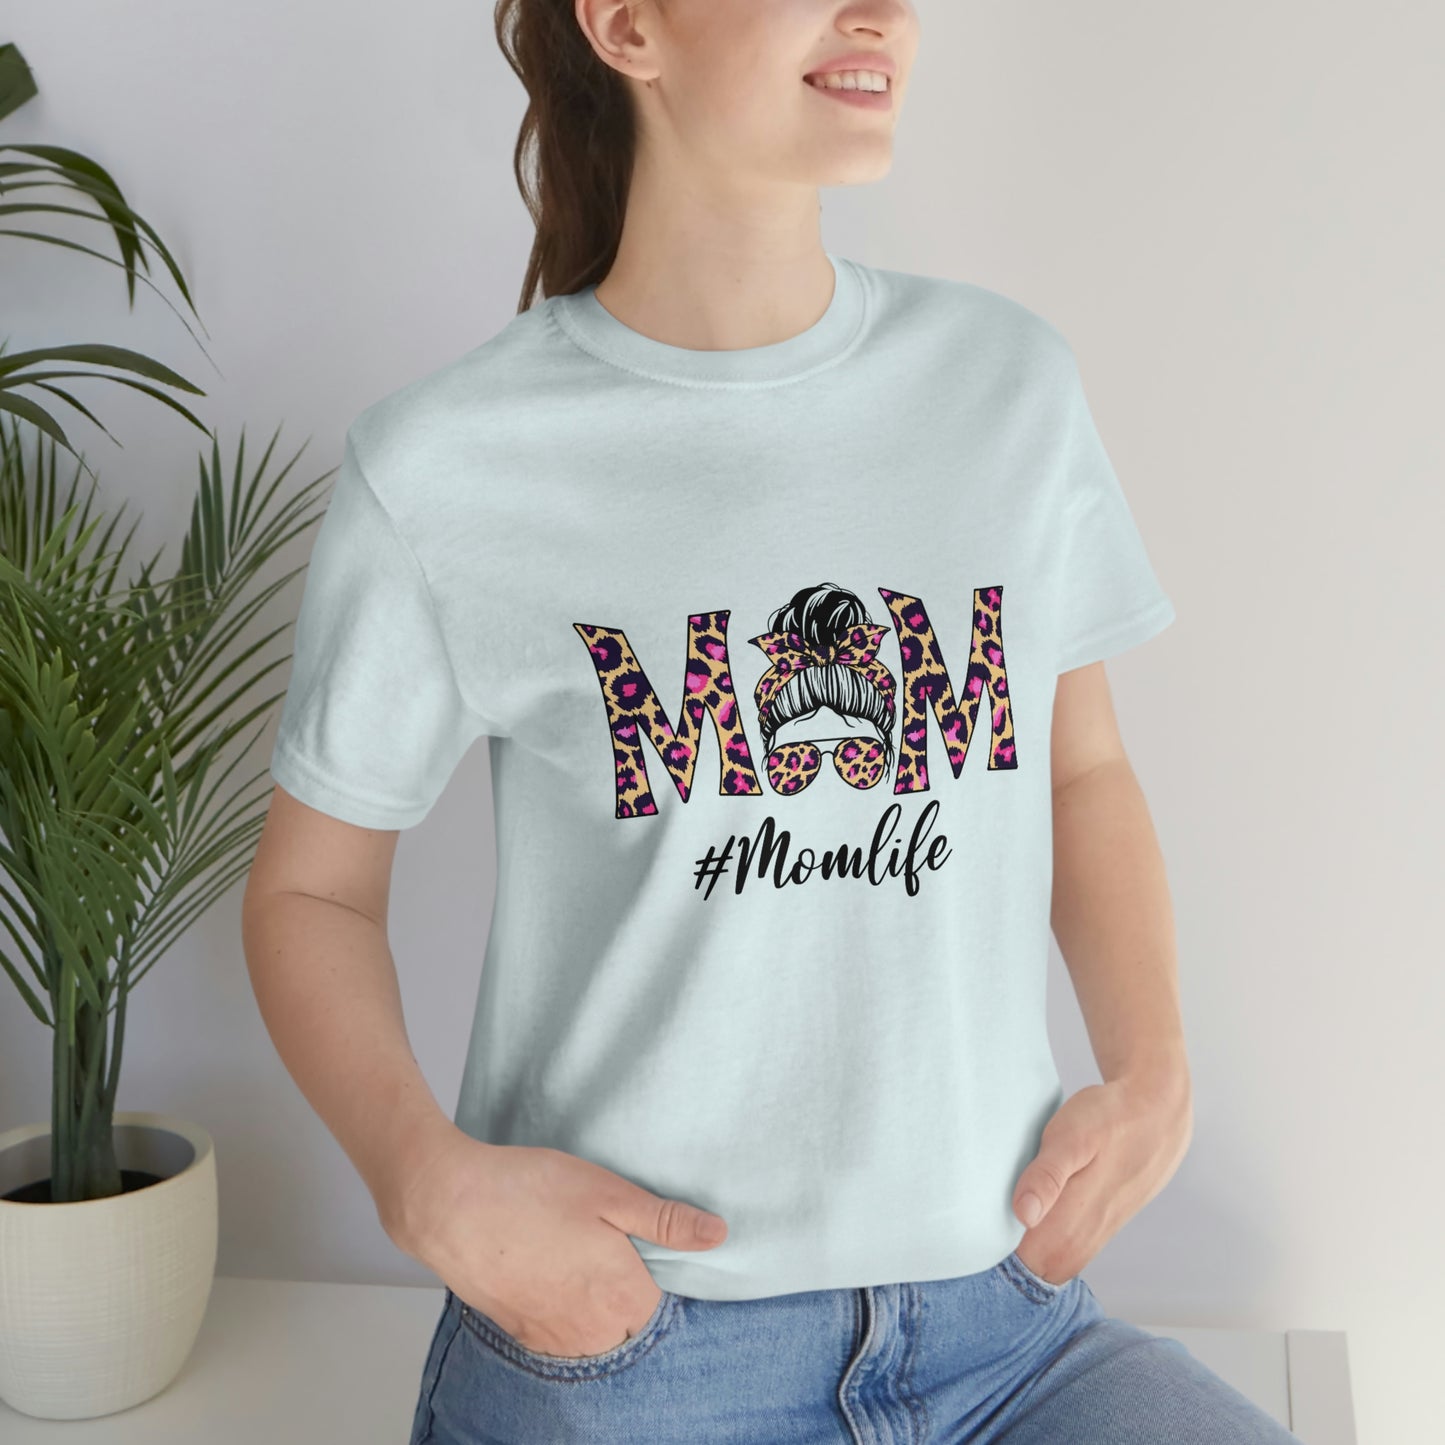 A thoughtful and practical Mothersday gift. This t-shirt in ice blue is made with high-quality materials to ensure both comfort and durability.  